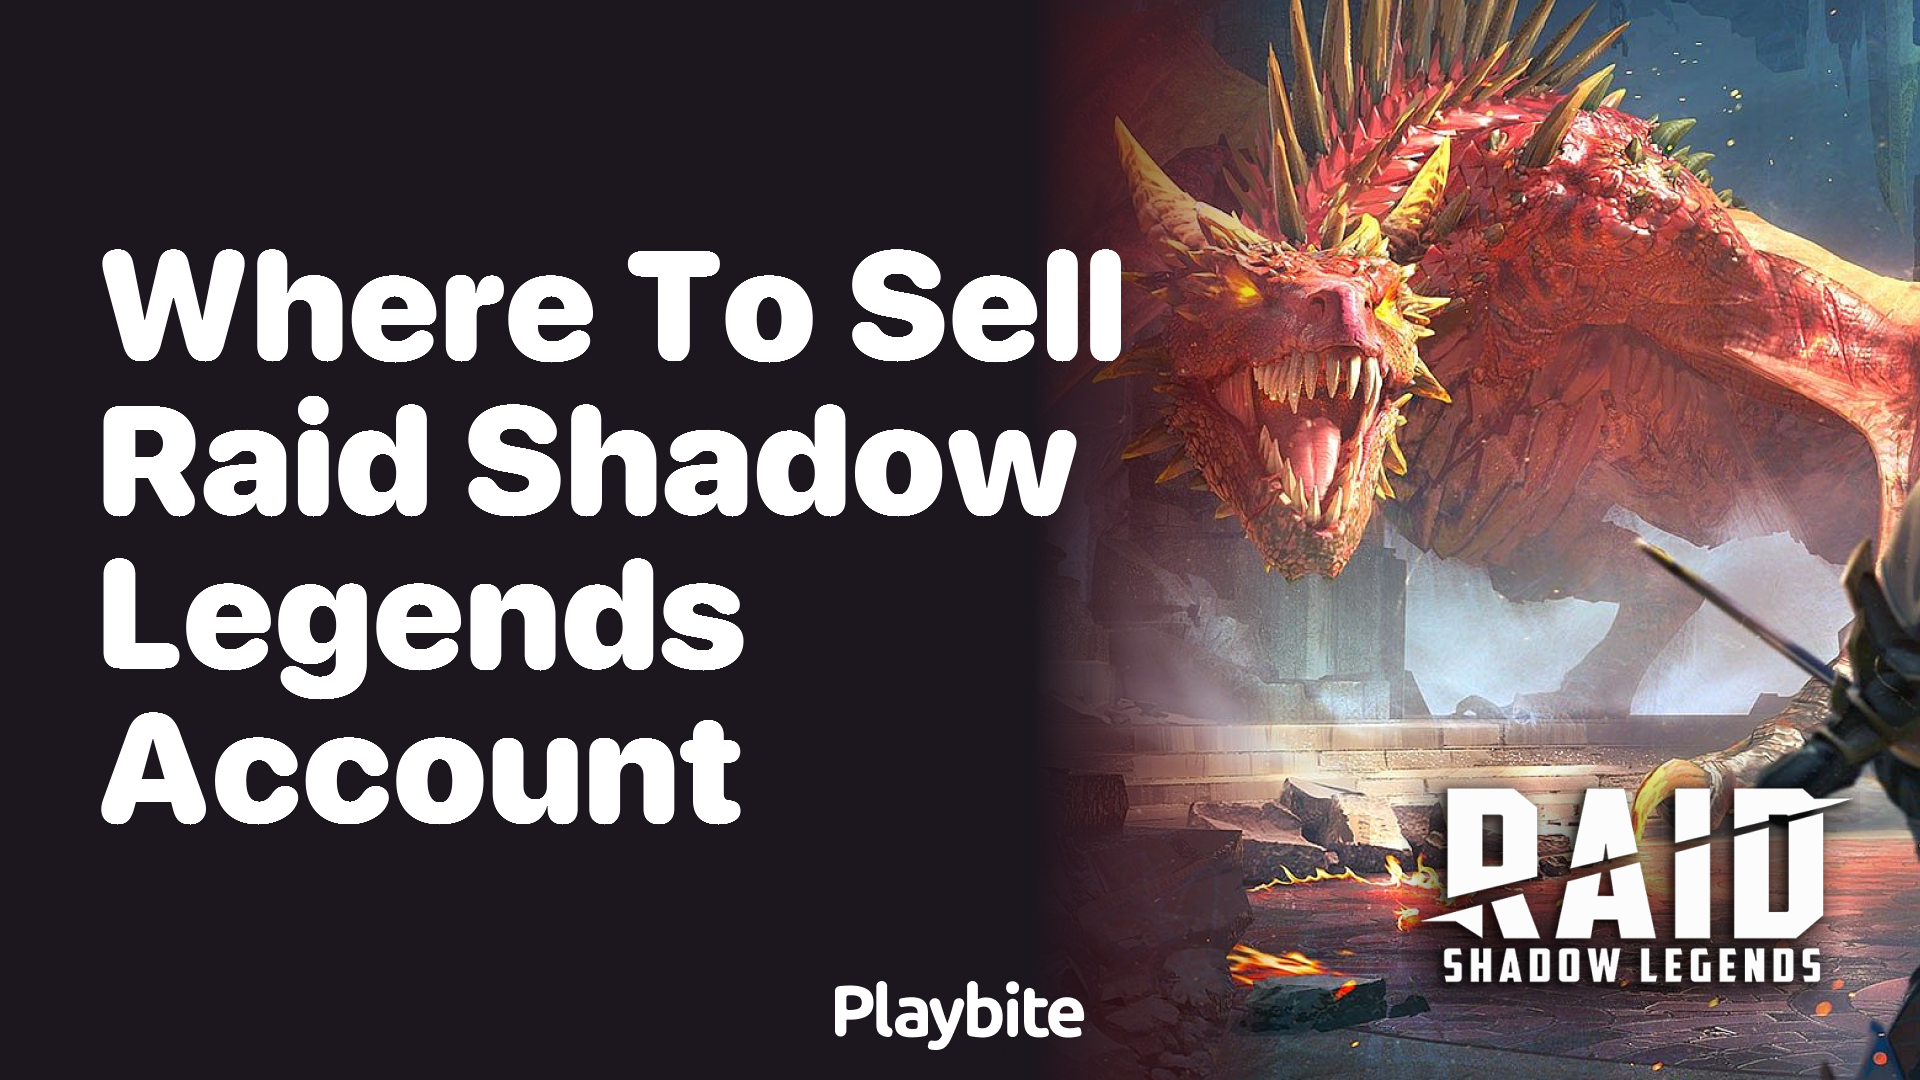 Where to Sell Your Raid Shadow Legends Account